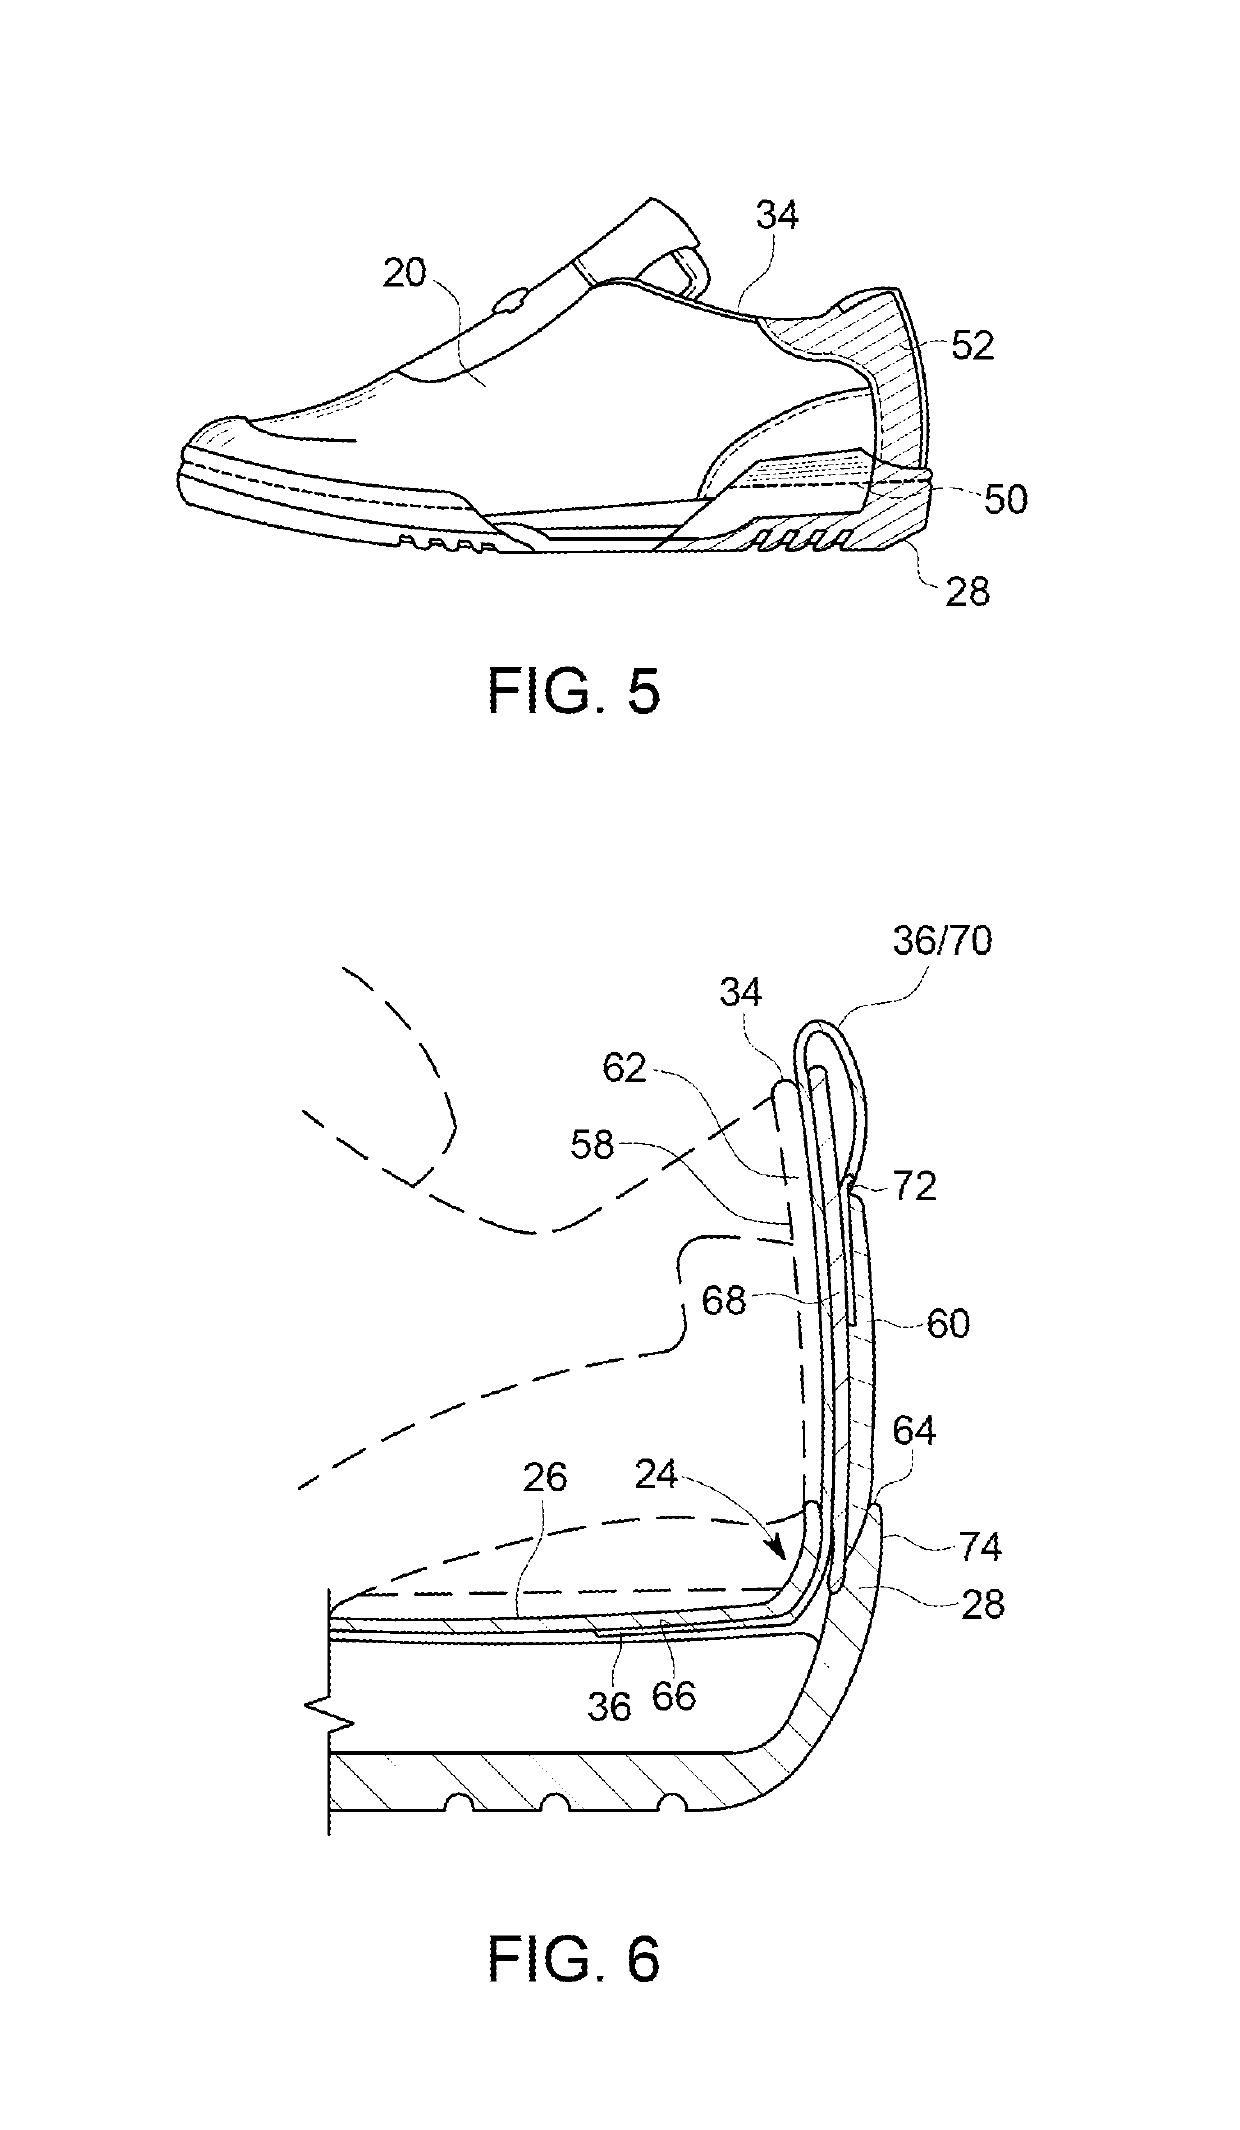 Electrically conductive footwear utilizing earthing technology for enhancing human performance